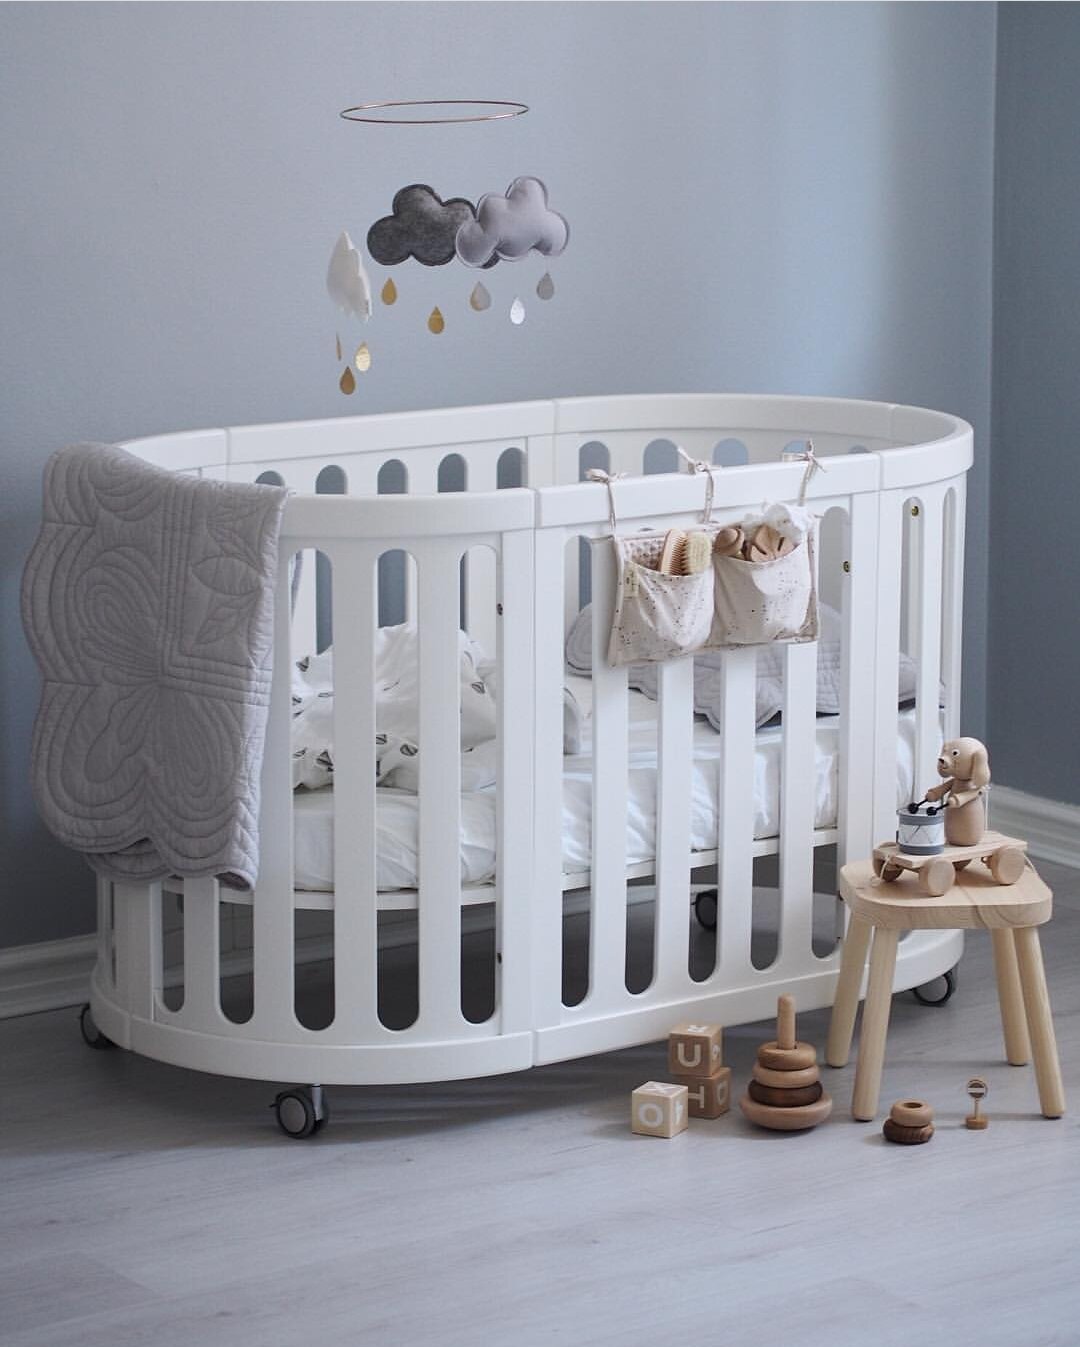 crib with mattress and changing table